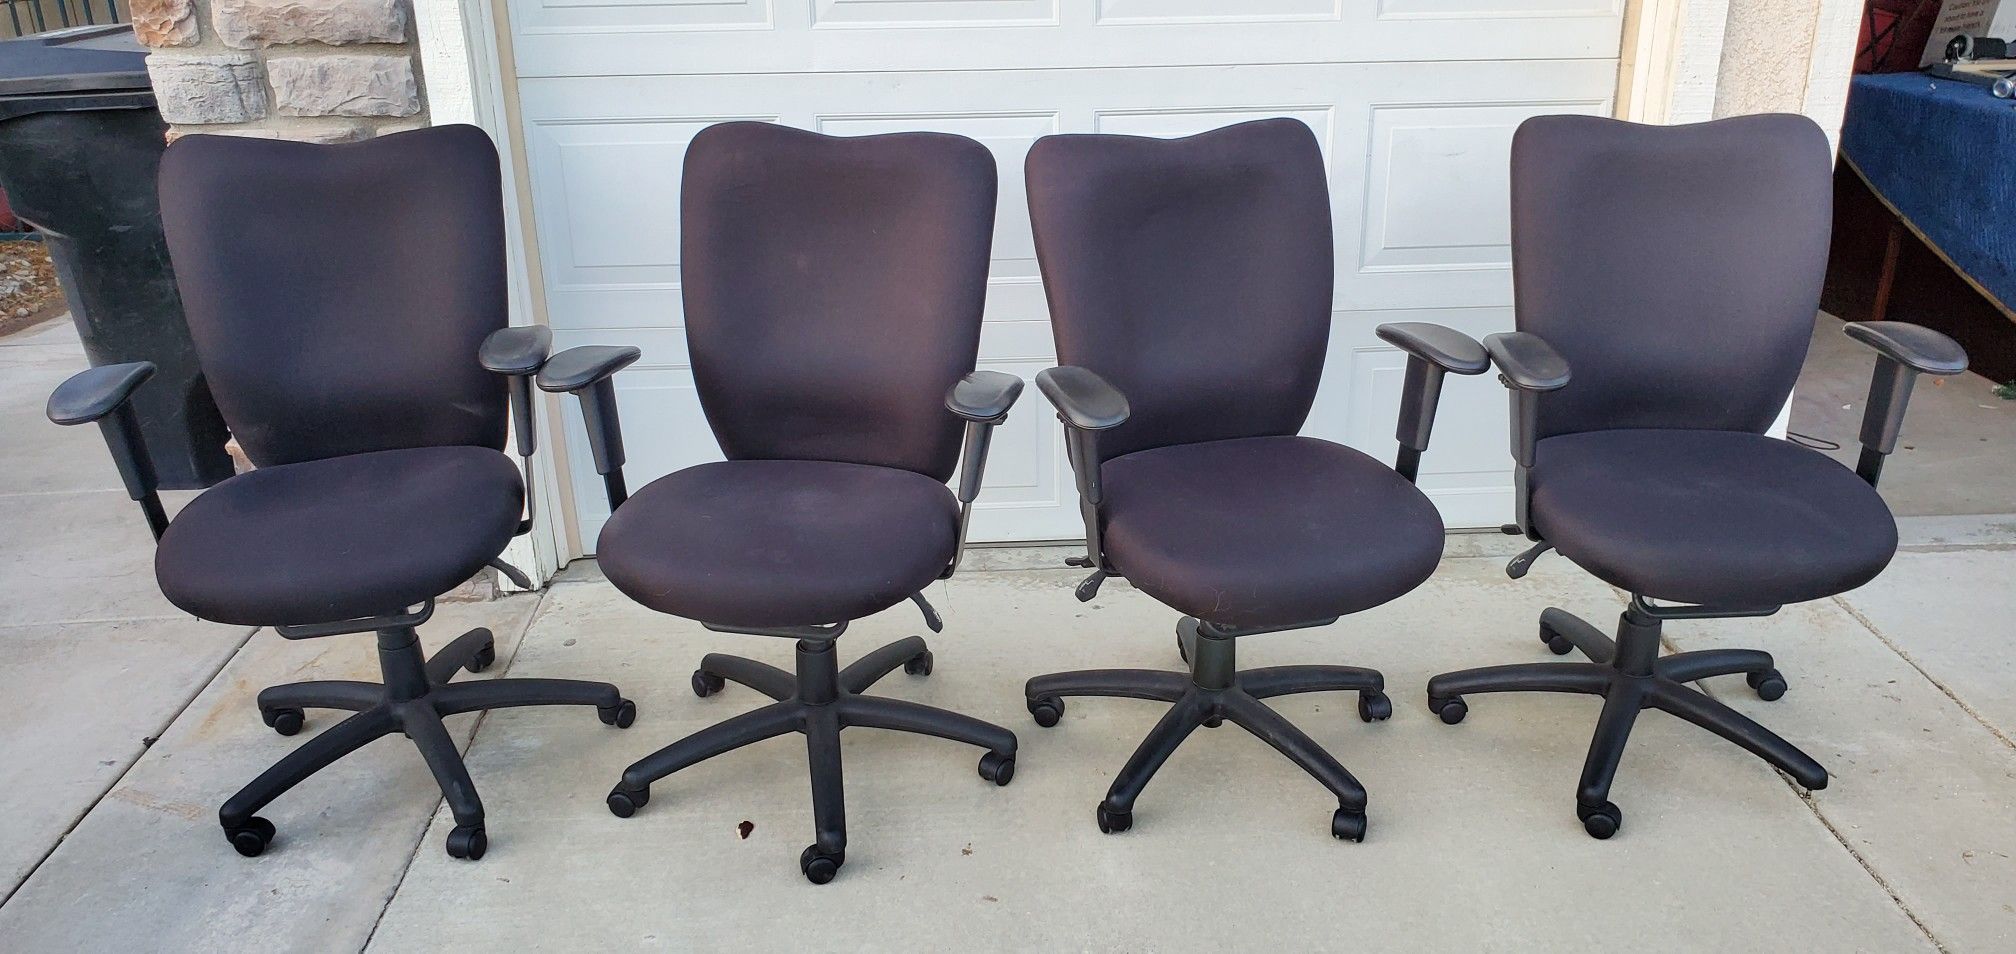 Computer/office chairs